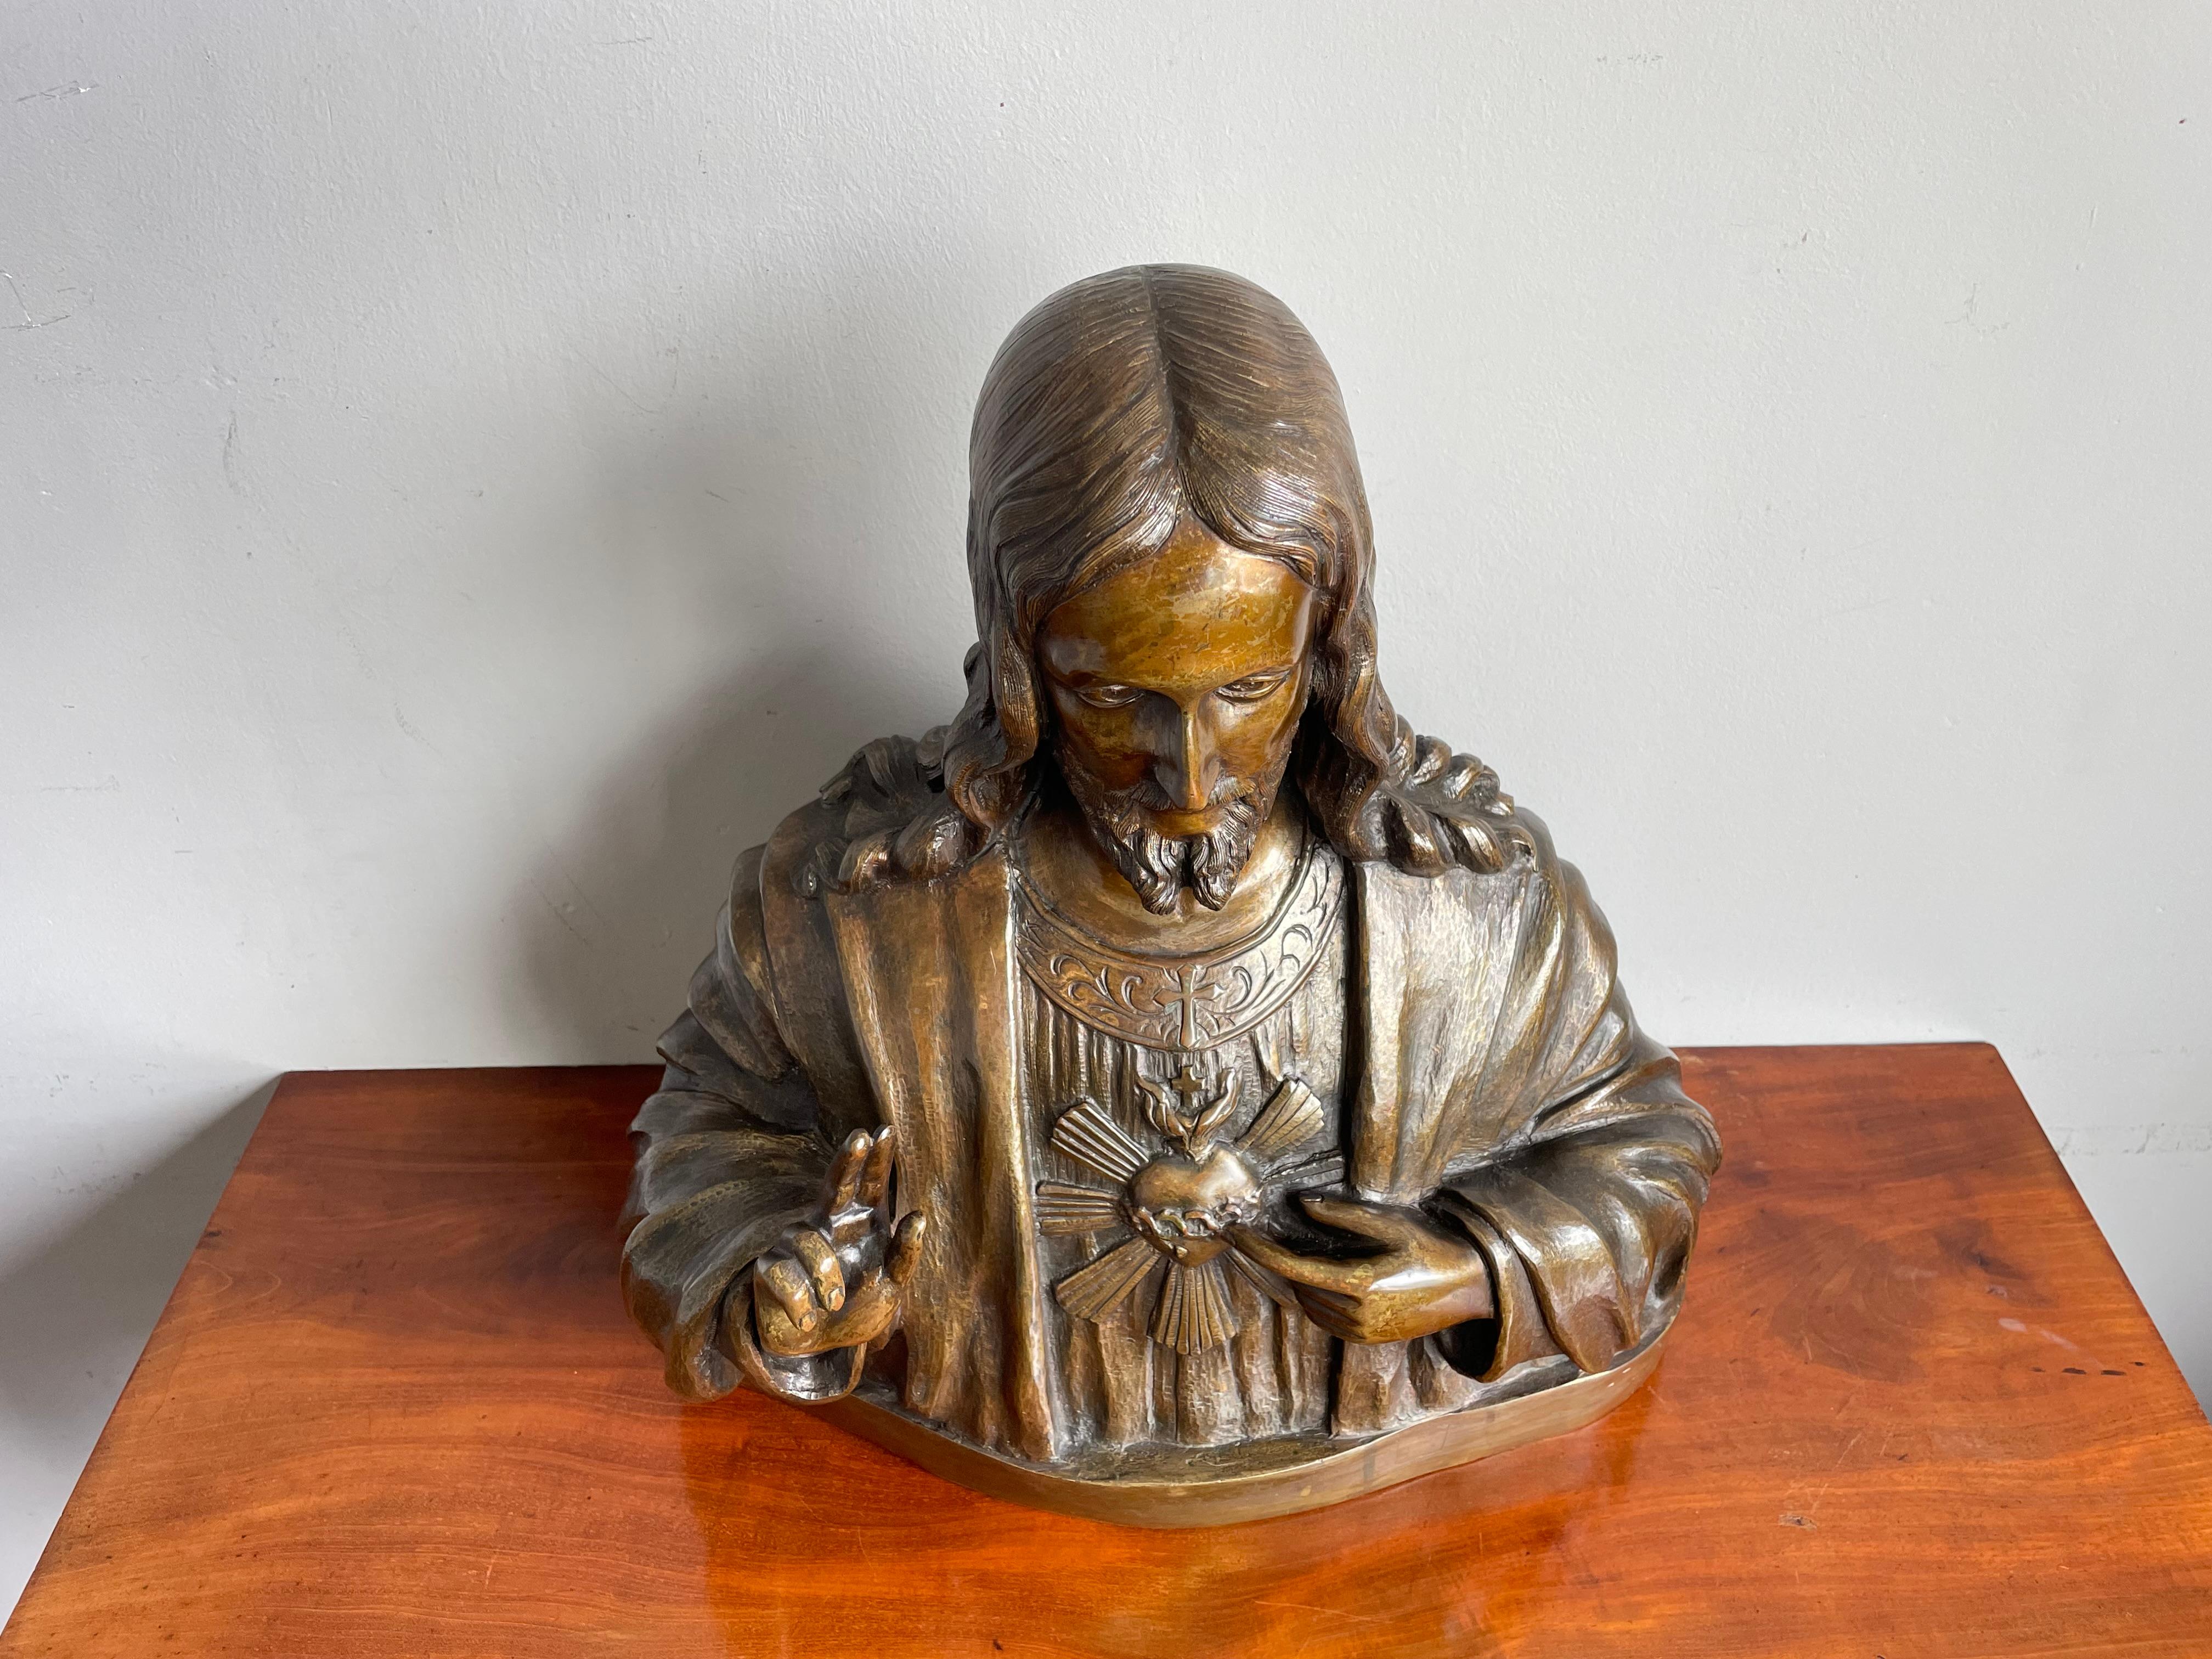 Rare Antique Bronze Holy Heart Sculpture / Bust of Our Lord Jesus Christ 1920 For Sale 2